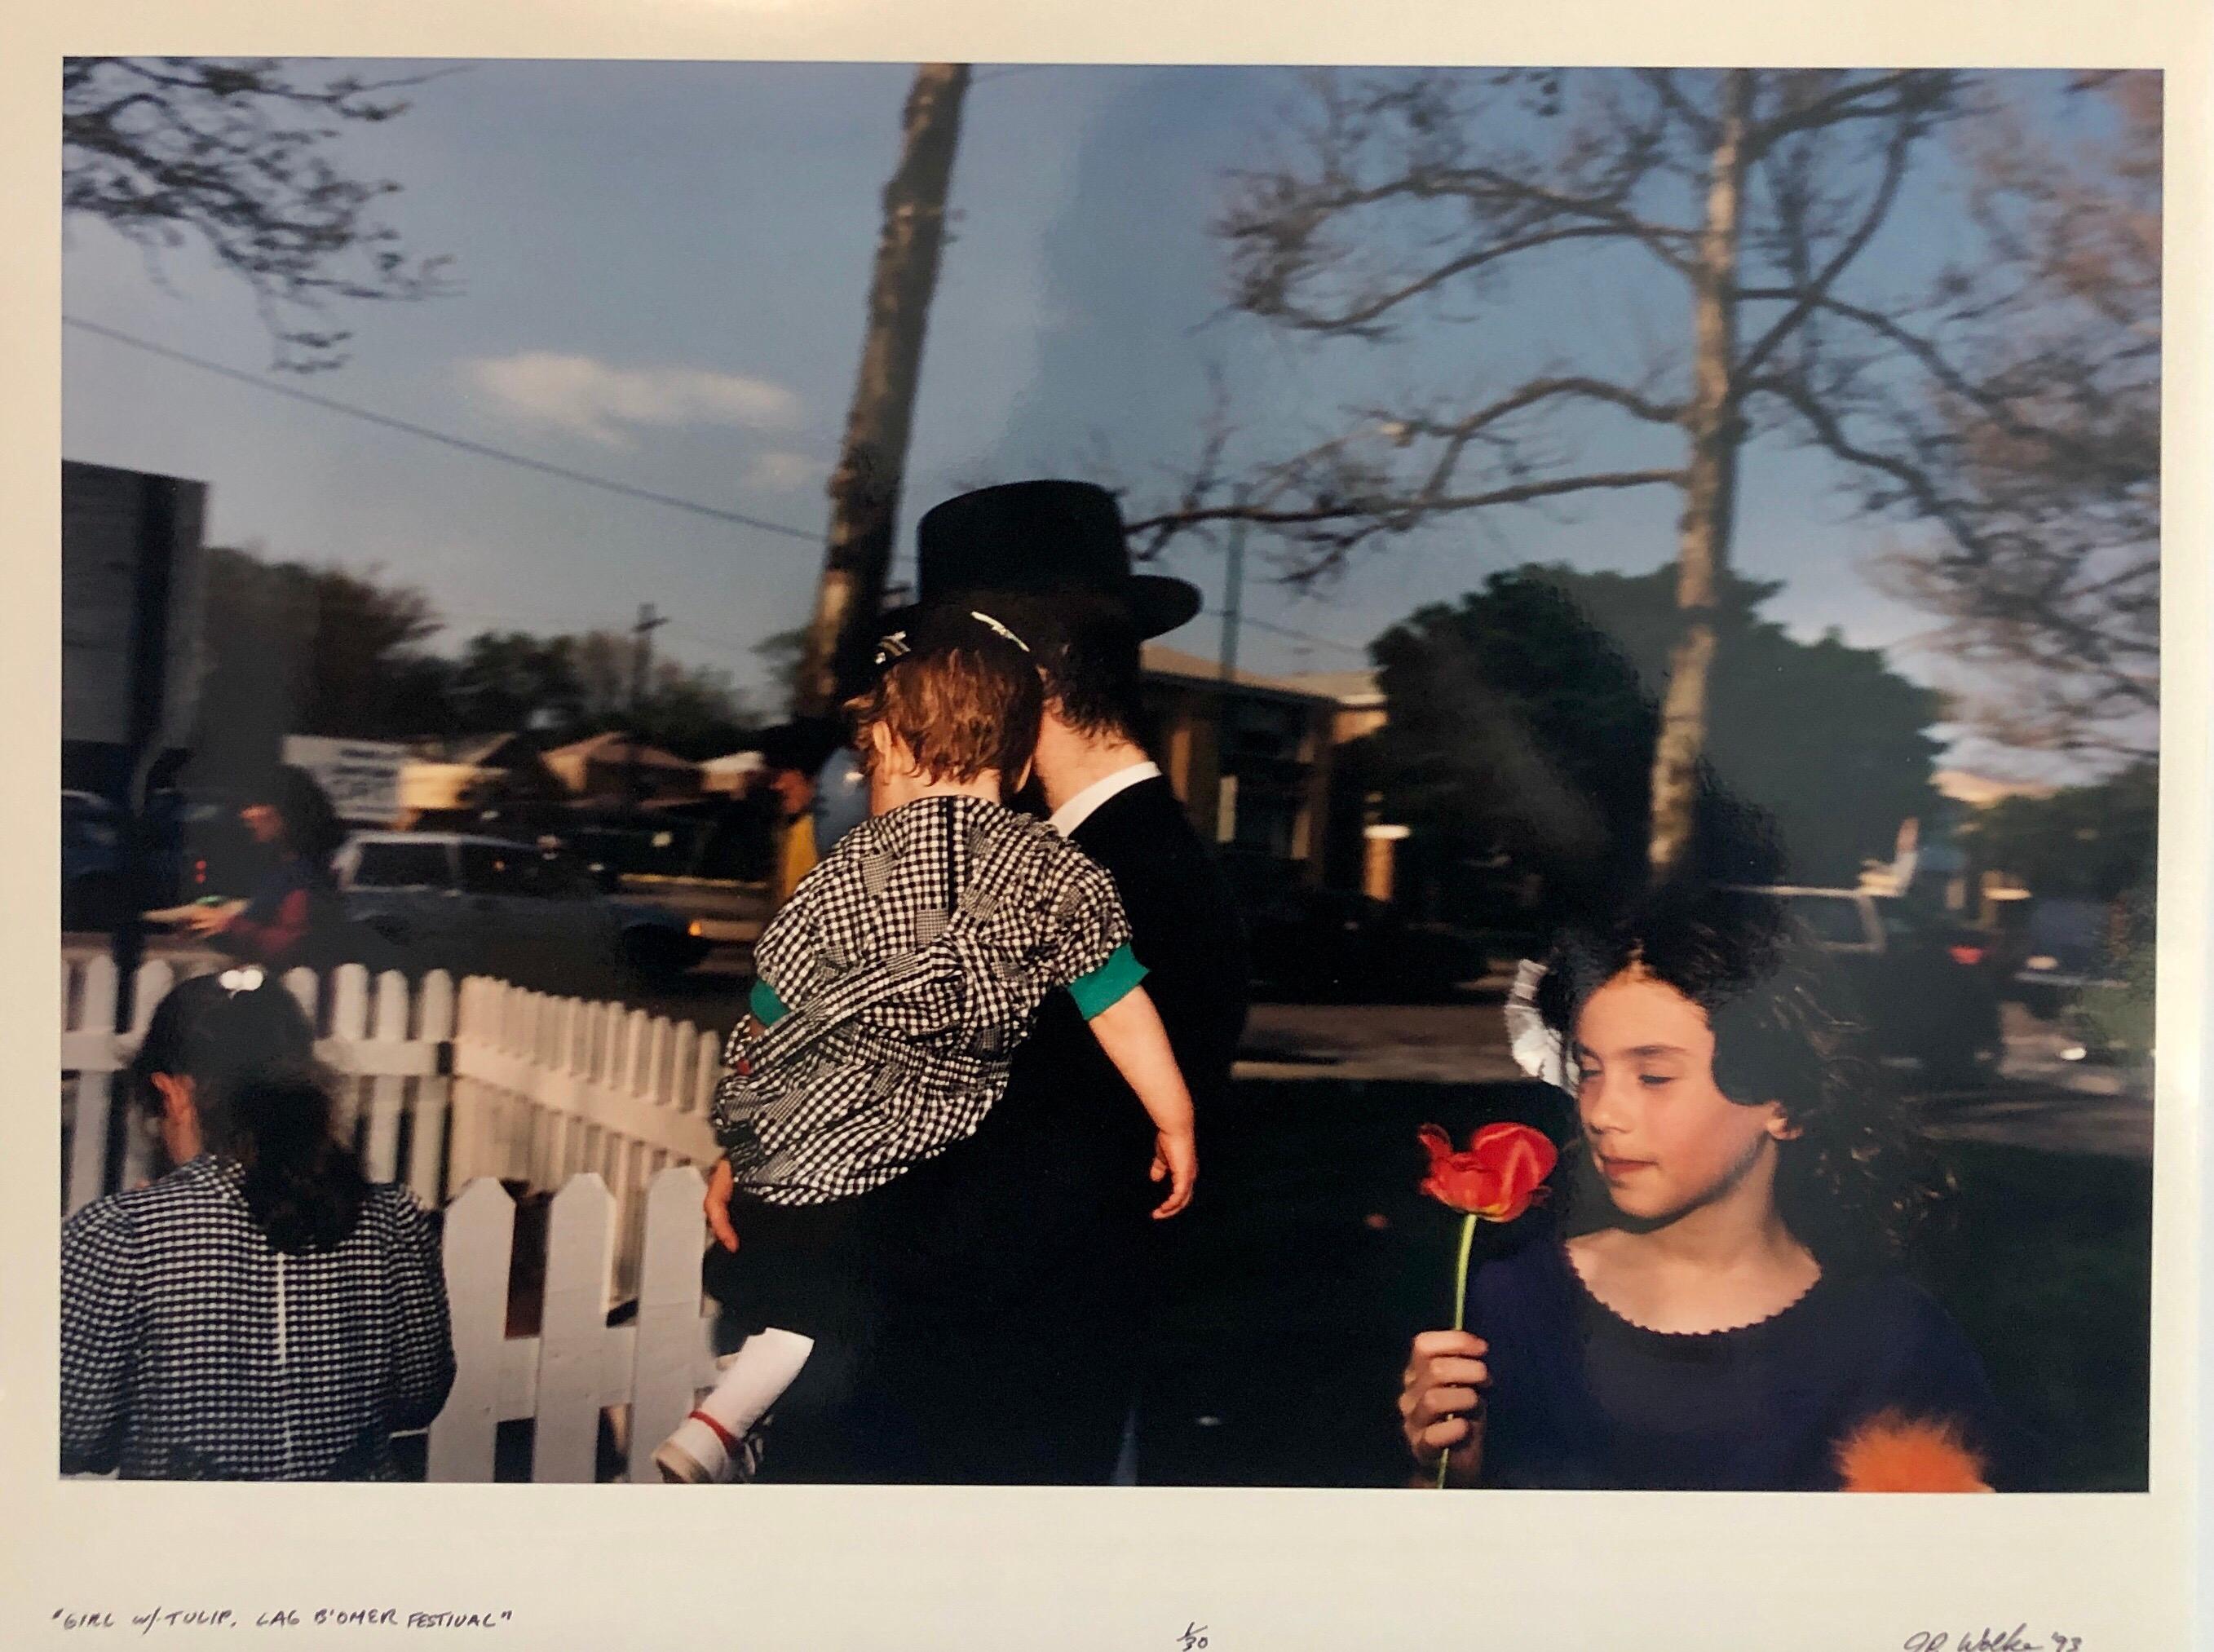 This is from a series done about the Habad Hasidic Jewish community in Chicago. This is from the holiday Lag Baomer.
Jay Wolke lives and works in Chicago, Illinois. He has had solo exhibitions at the Art Institute of Chicago, the St. Louis Art